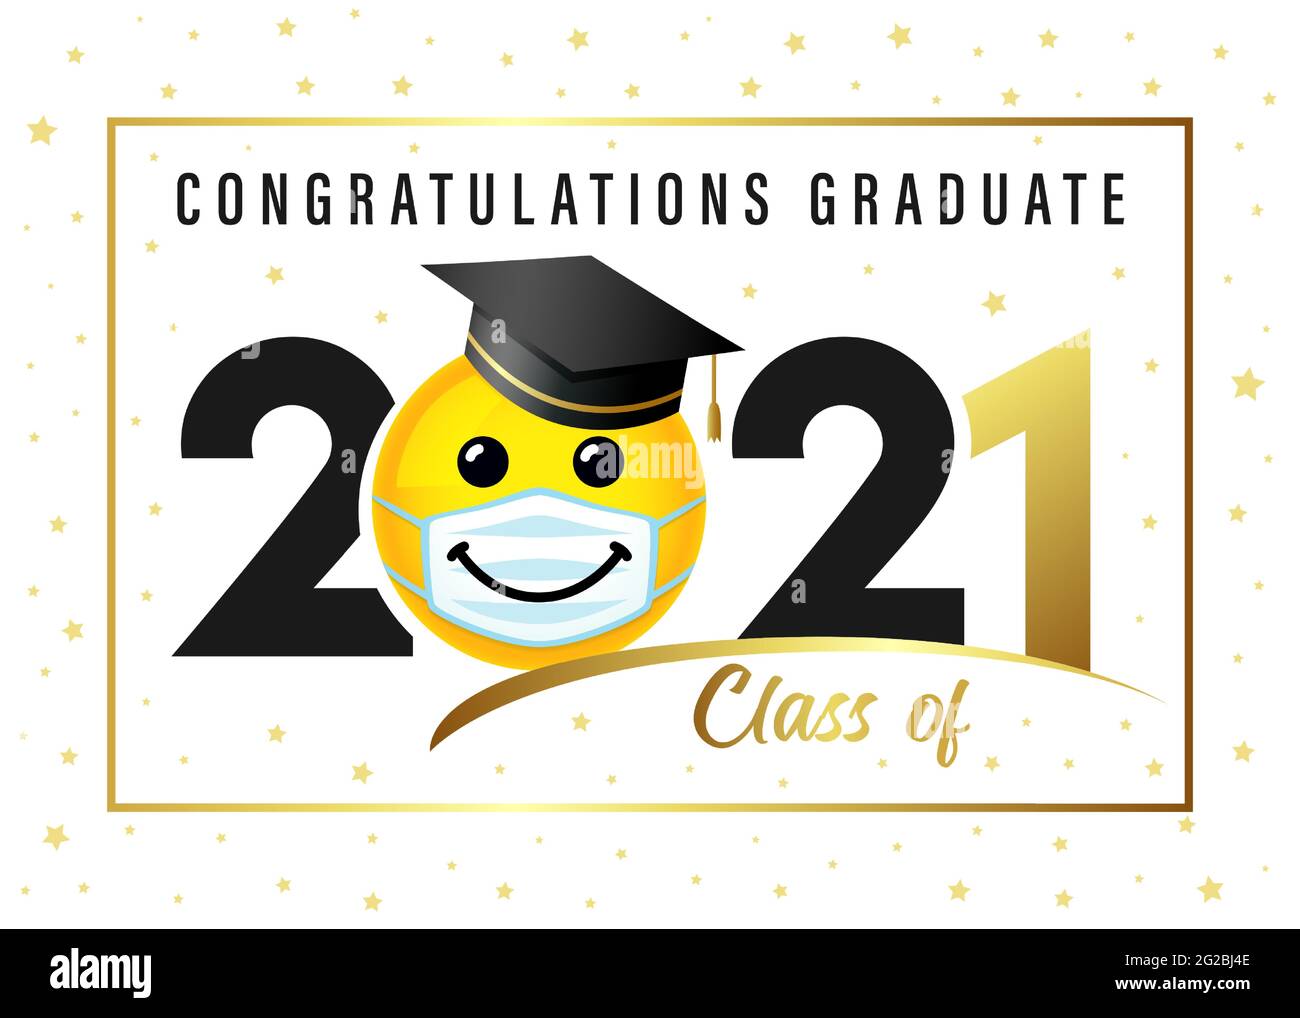 Congratulations Graduate Class of 2021, smile icon in academic cap. Vector illustration black and gold logo congrats ceremony with smiling in hat Stock Vector